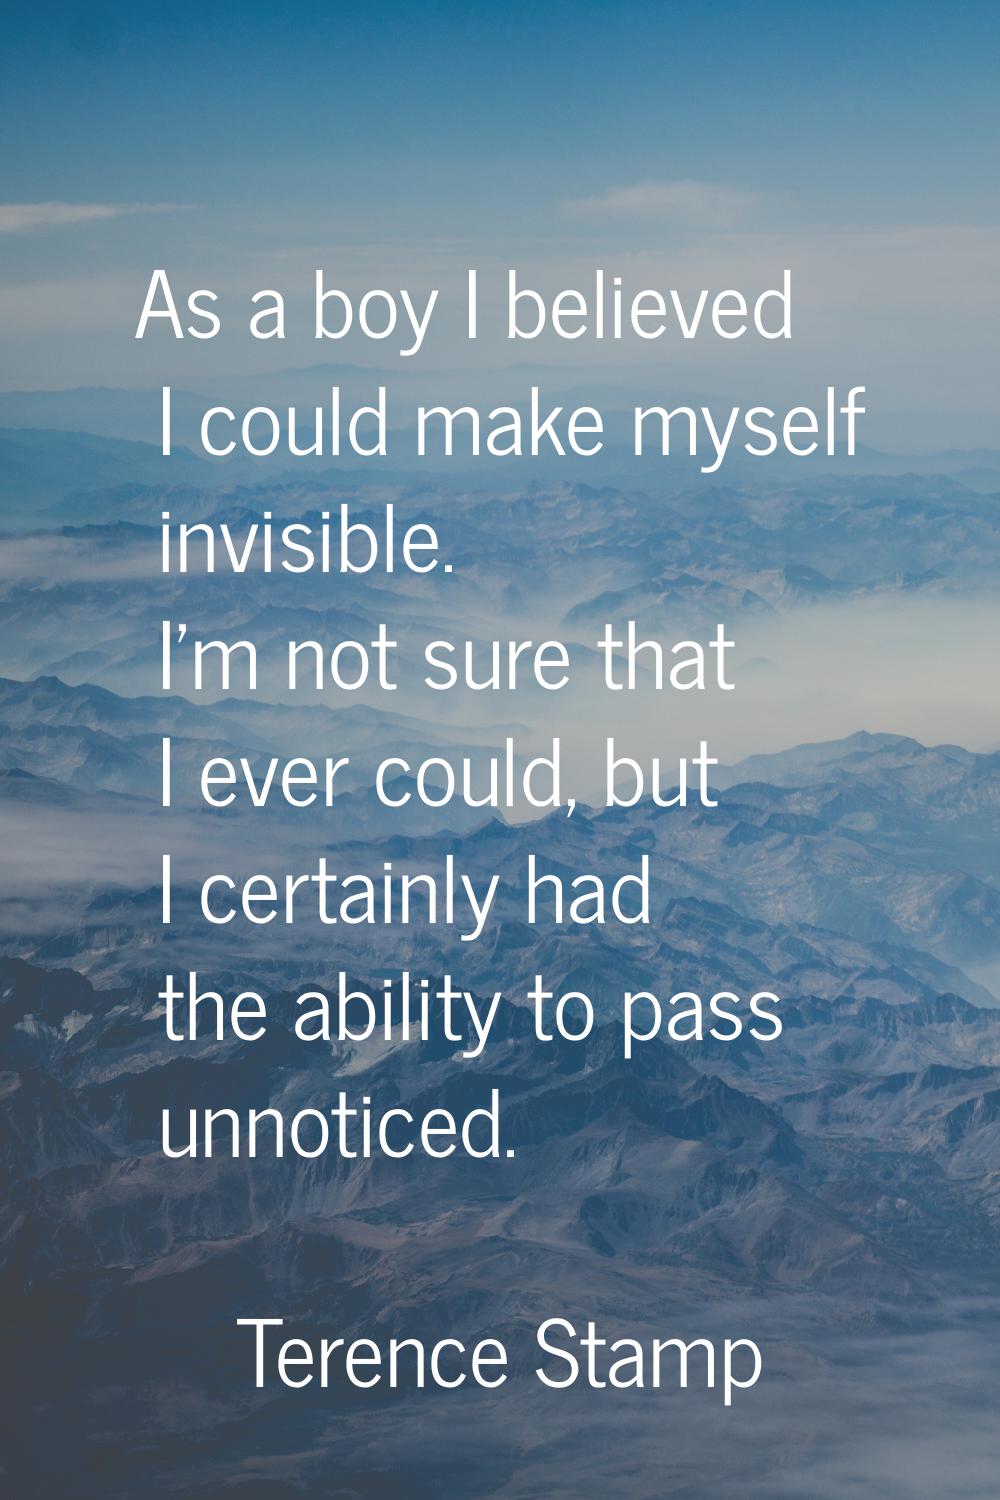 As a boy I believed I could make myself invisible. I'm not sure that I ever could, but I certainly 